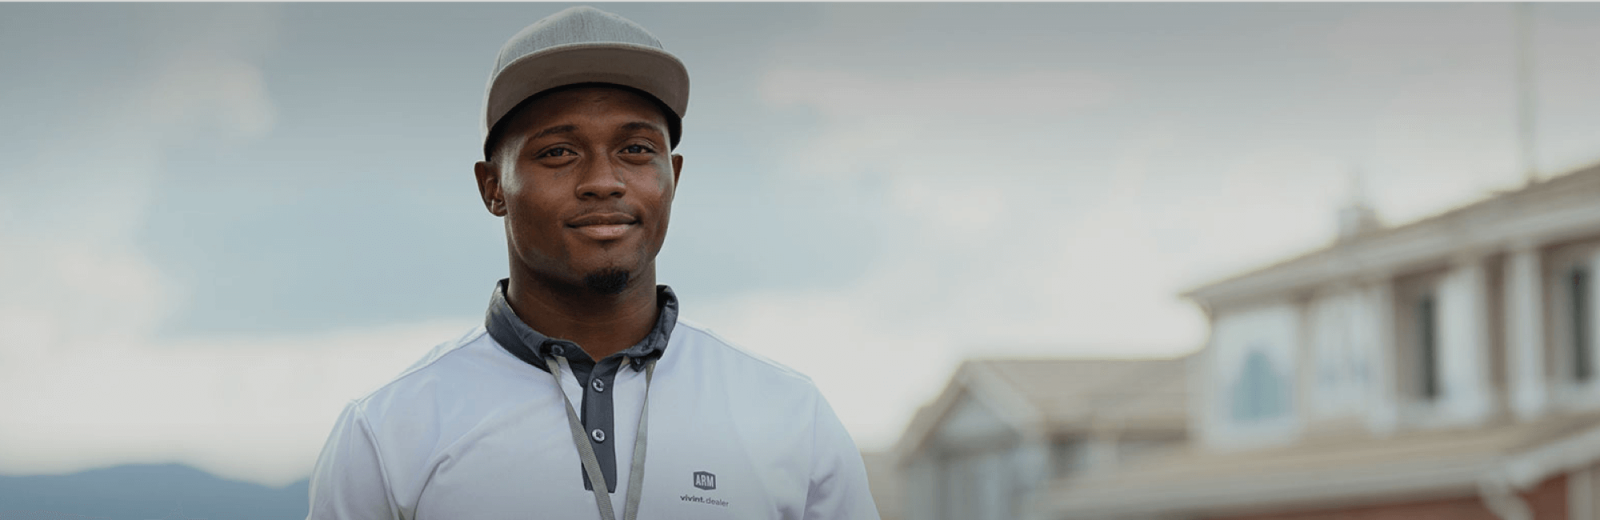 Vivint Smart Home Pro in a white shirt and hat